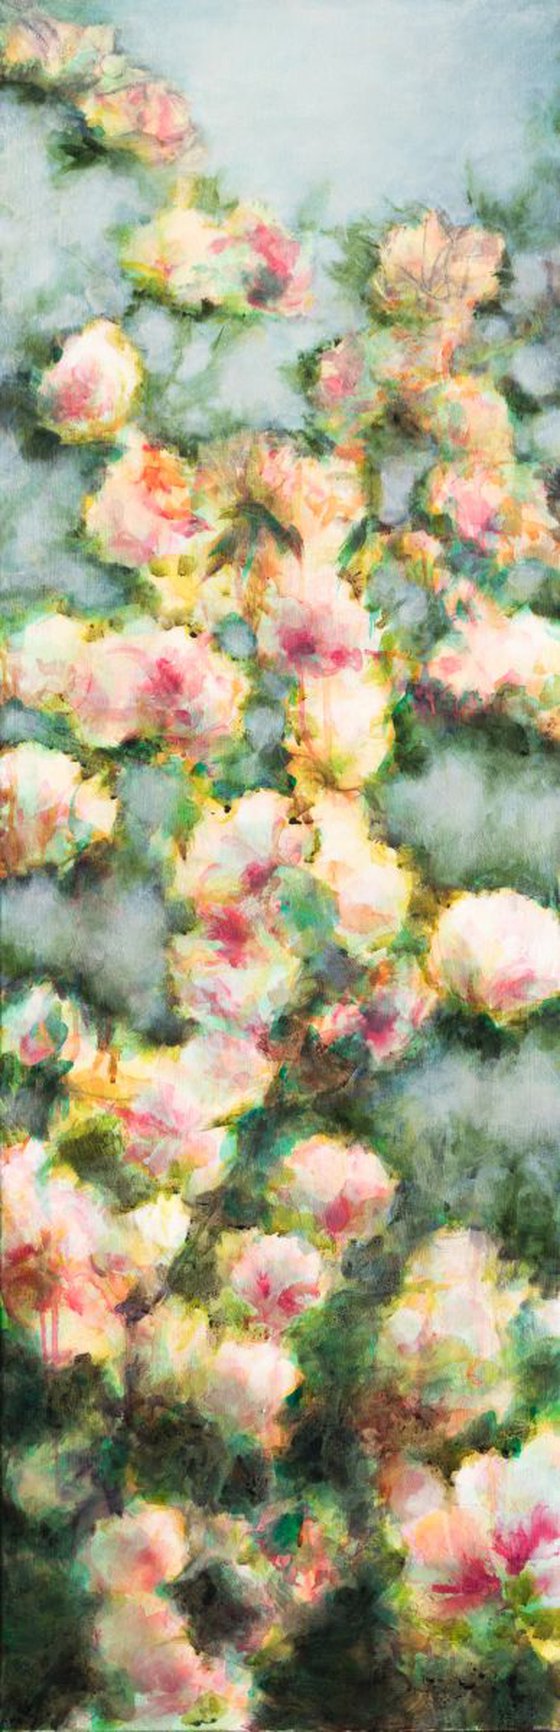 Flowers bush - abstract floral large size - 40X120 cm